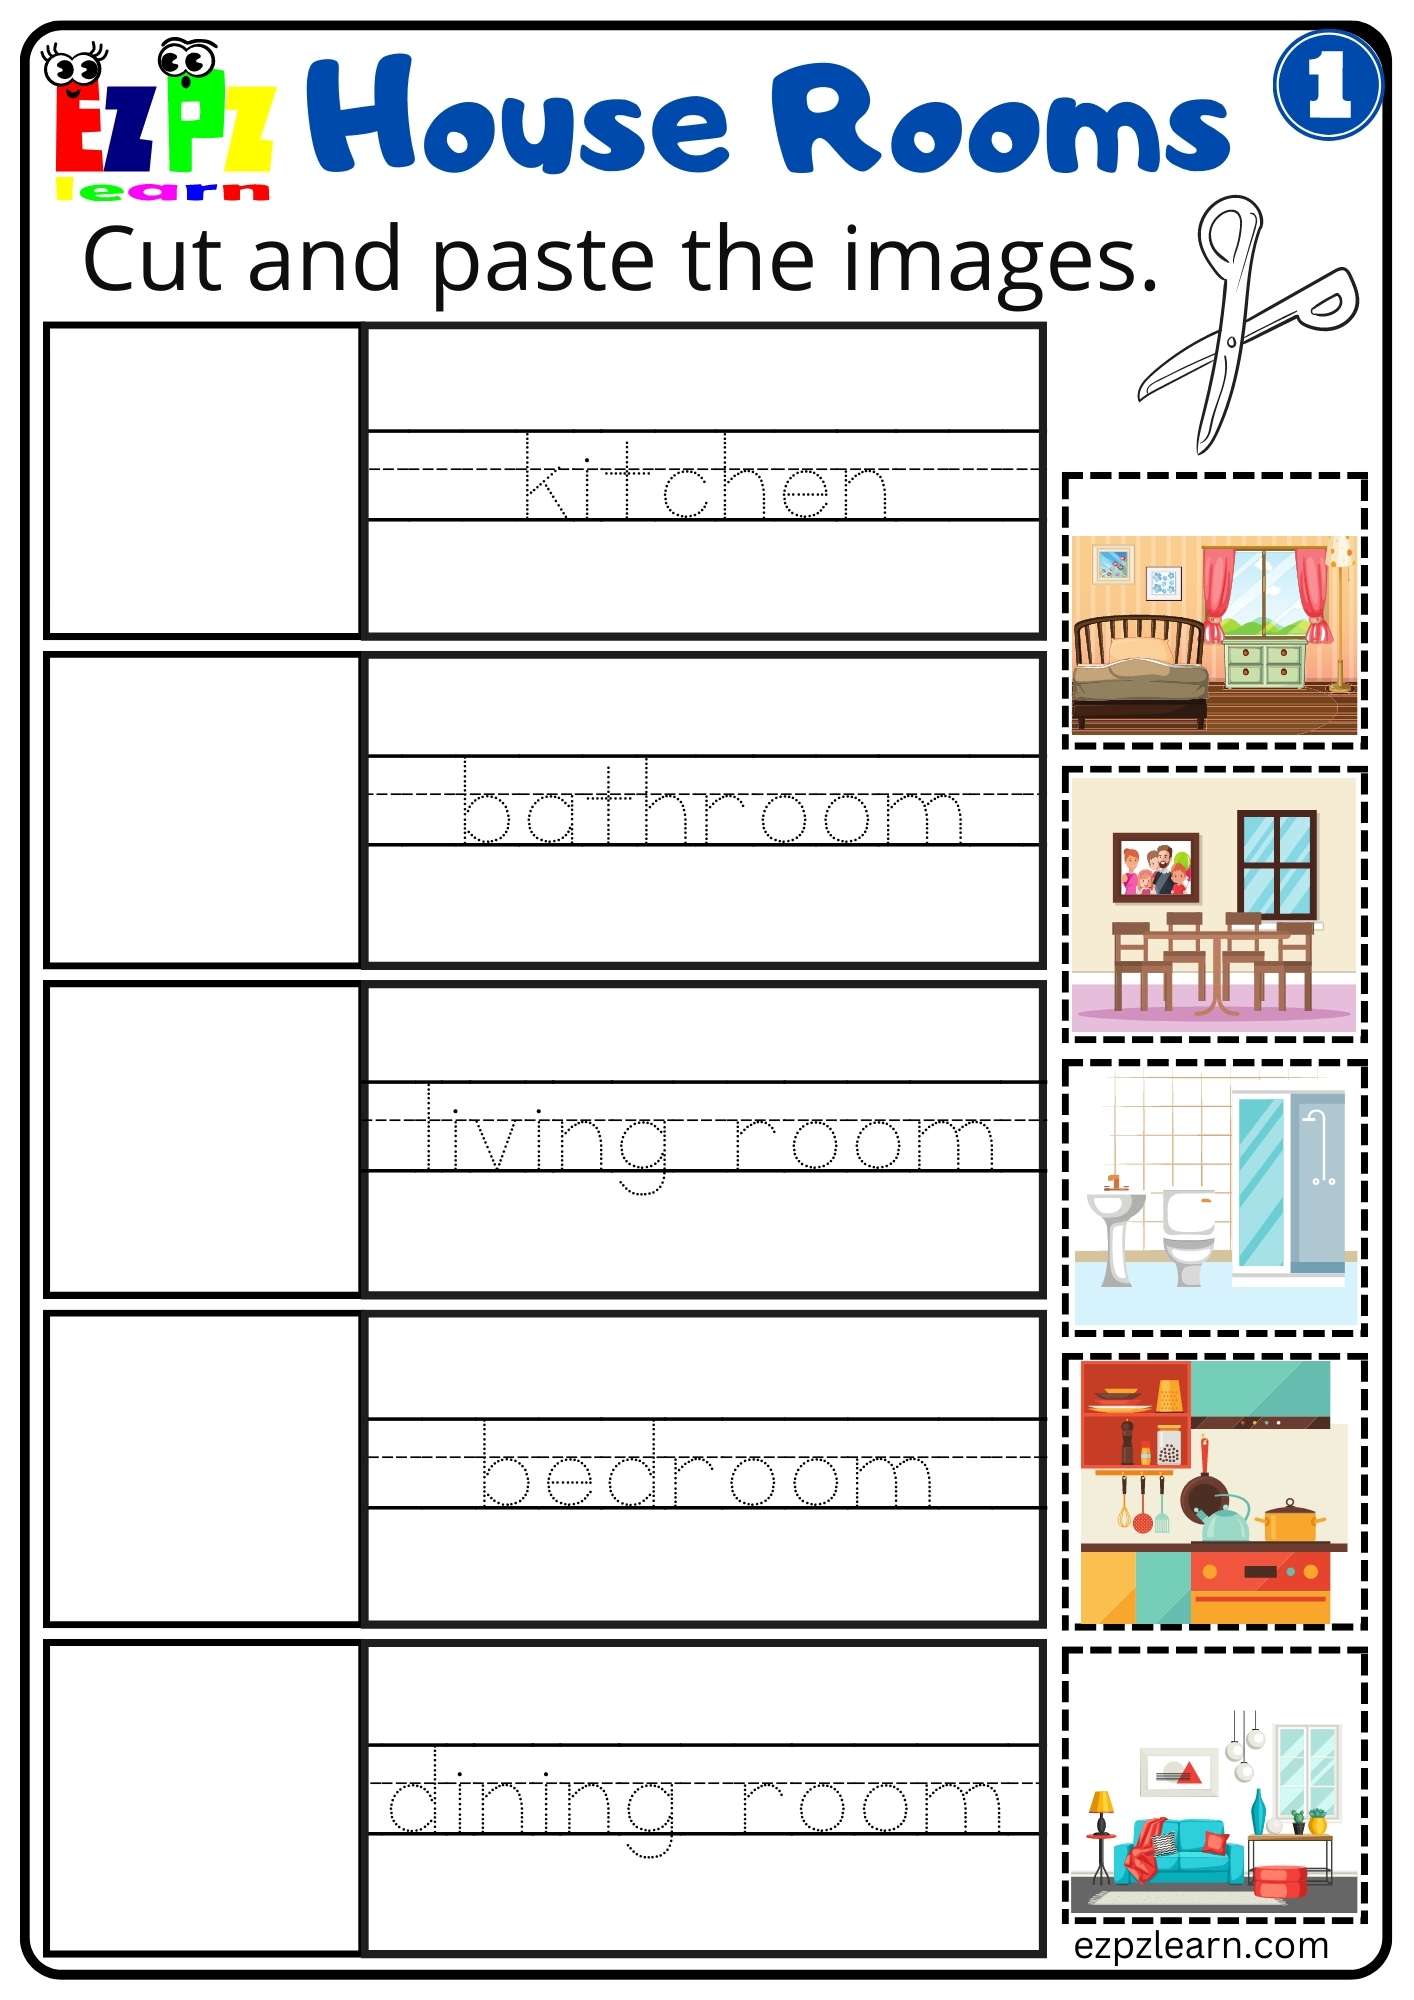 Rooms in the House Cut and Paste Page